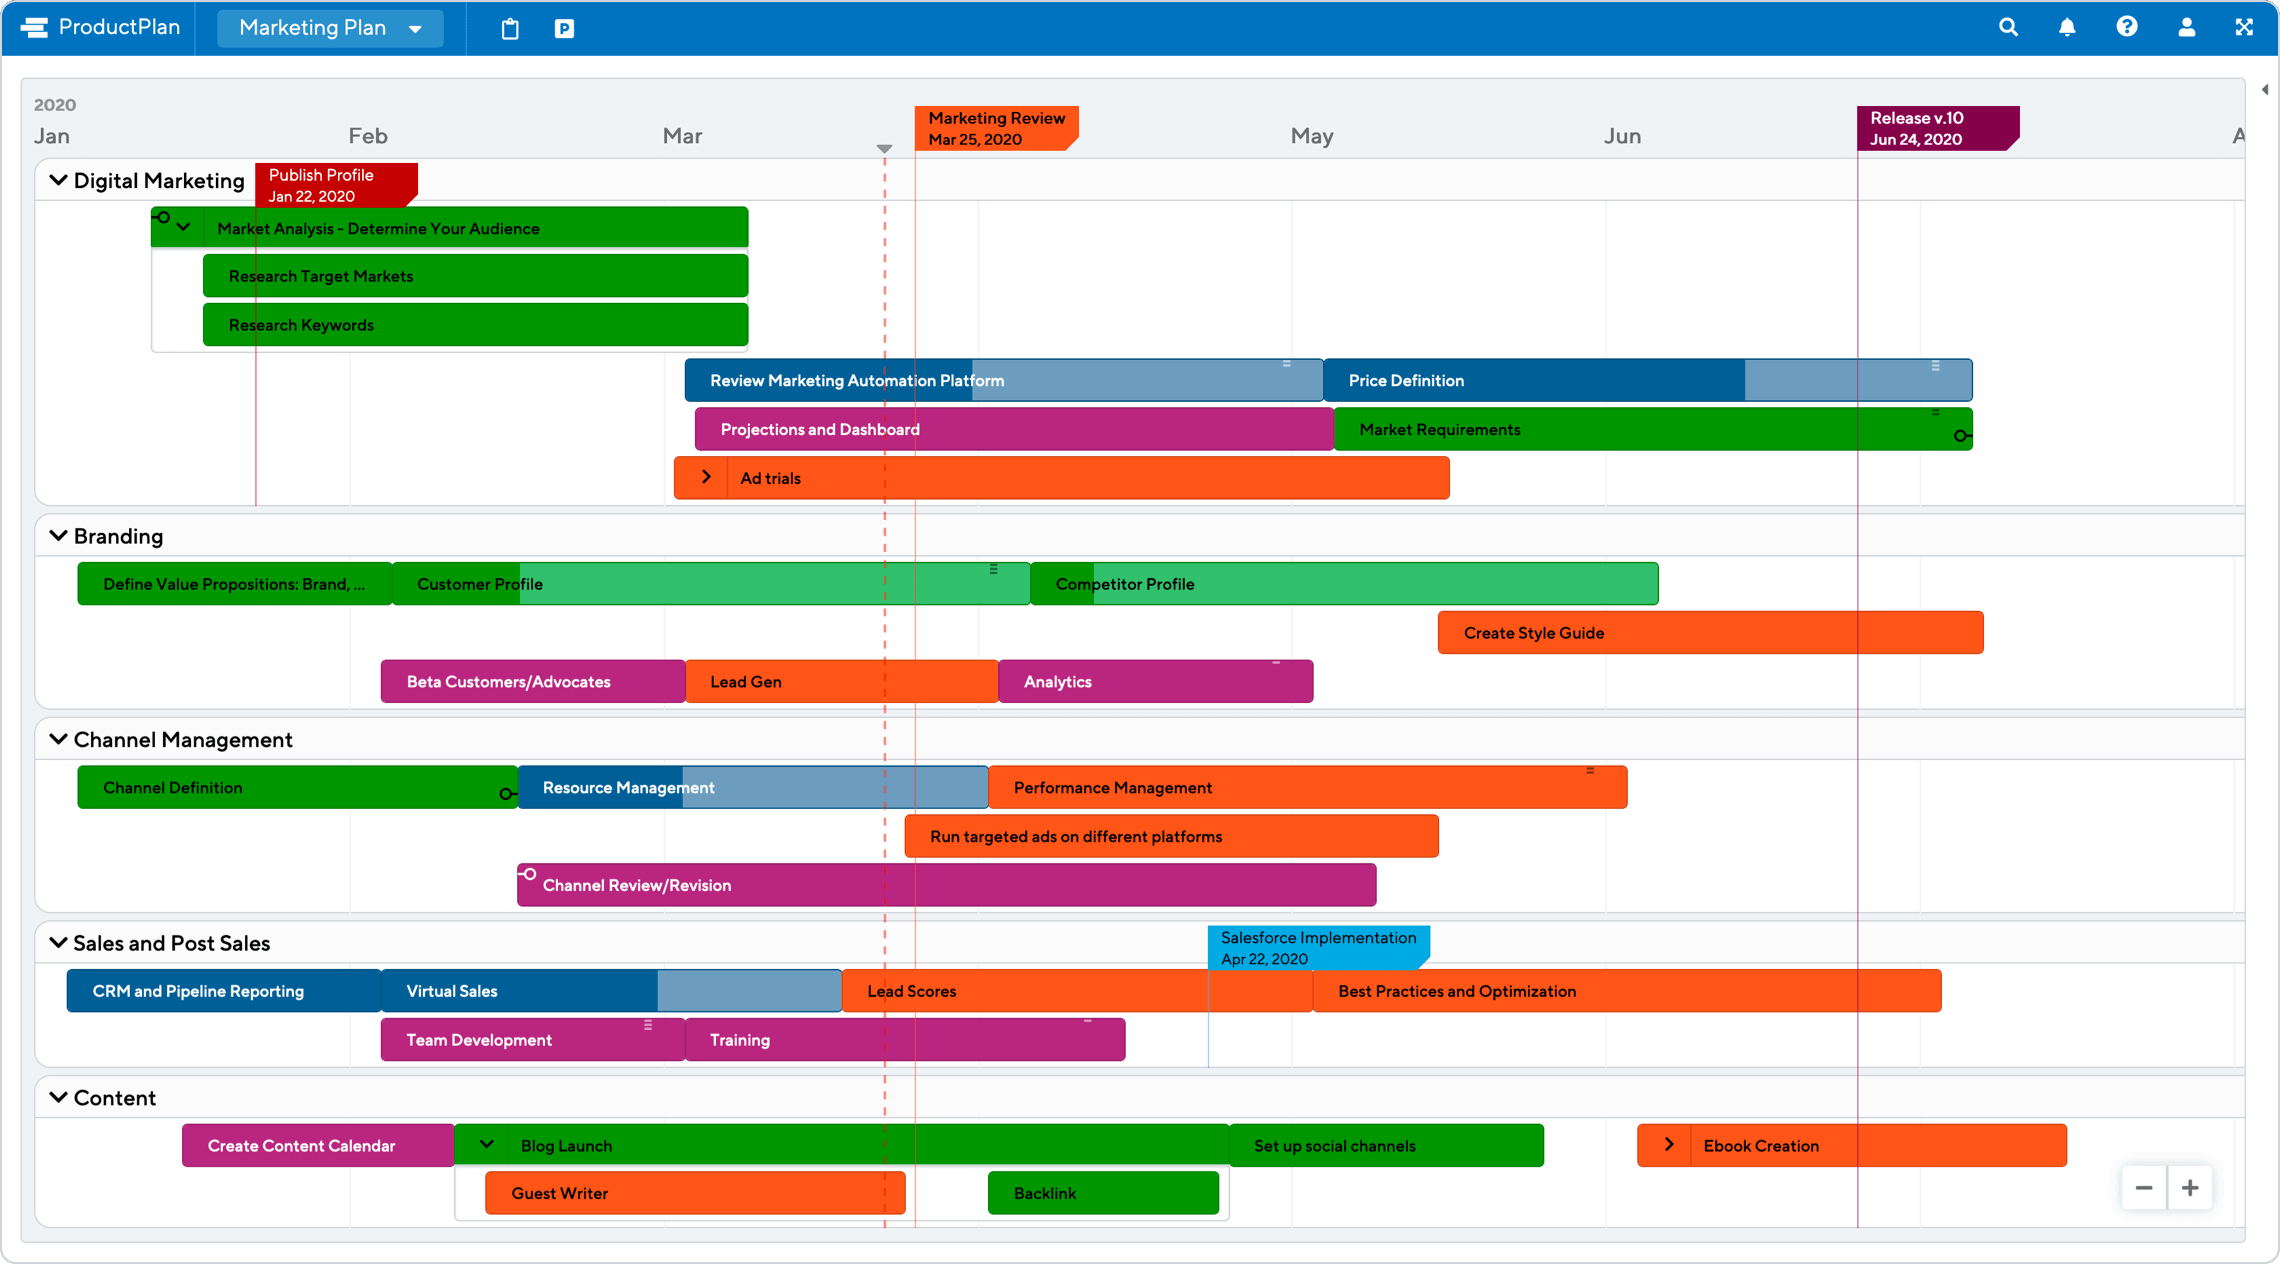 Marketing Campaign Timeline Template from www.productplan.com